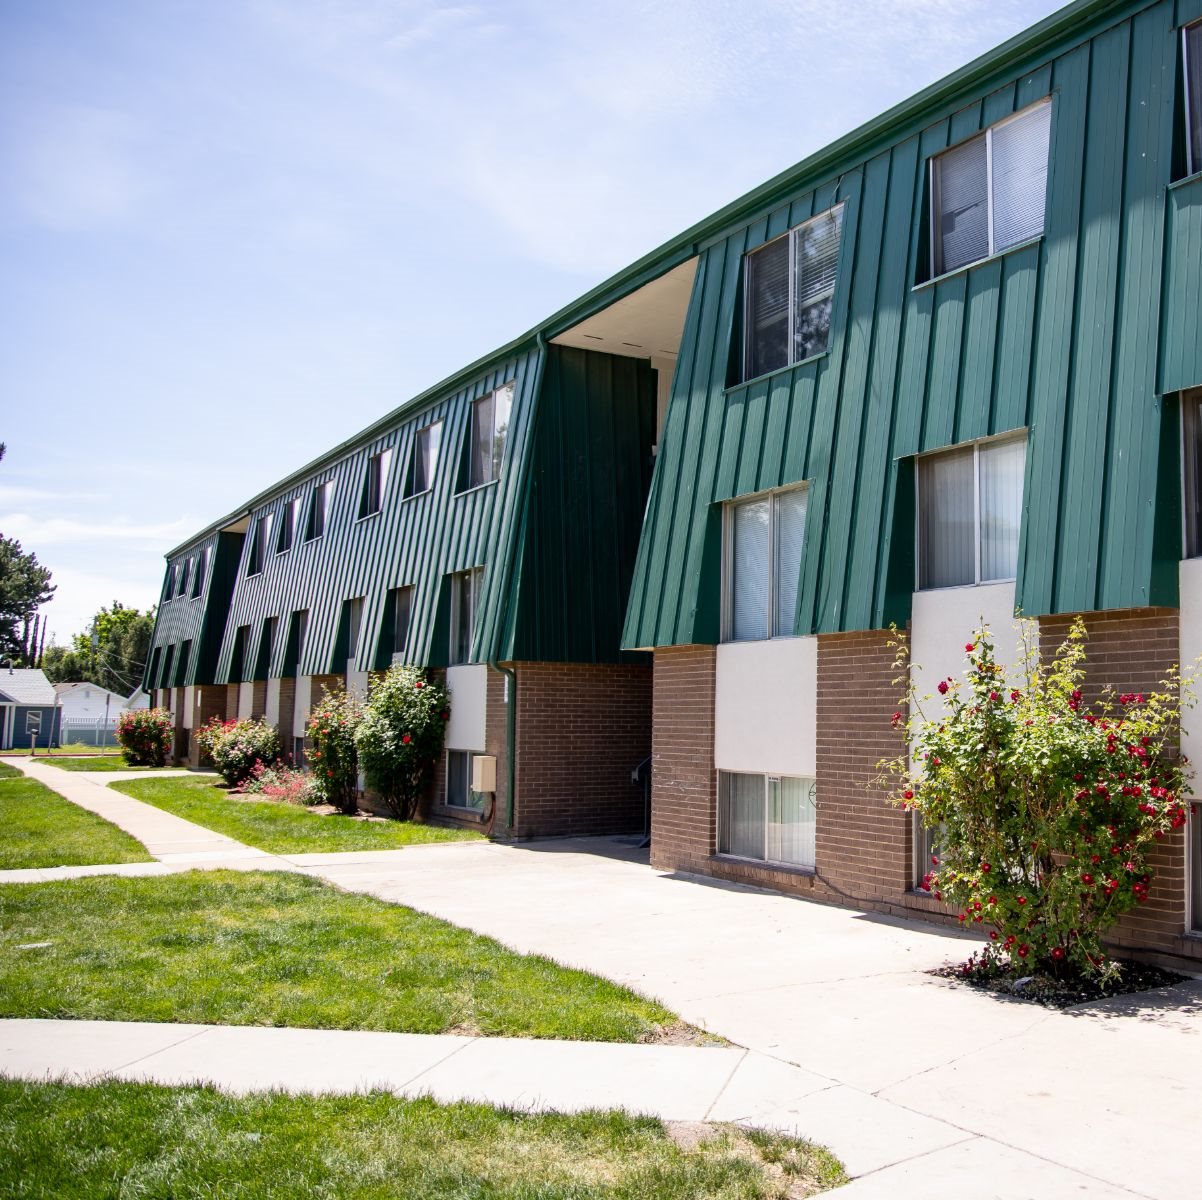 Photo of LAYTON POINTE APTS.. Affordable housing located at 355 EAST KNOWLTON STREET LAYTON, UT 84041